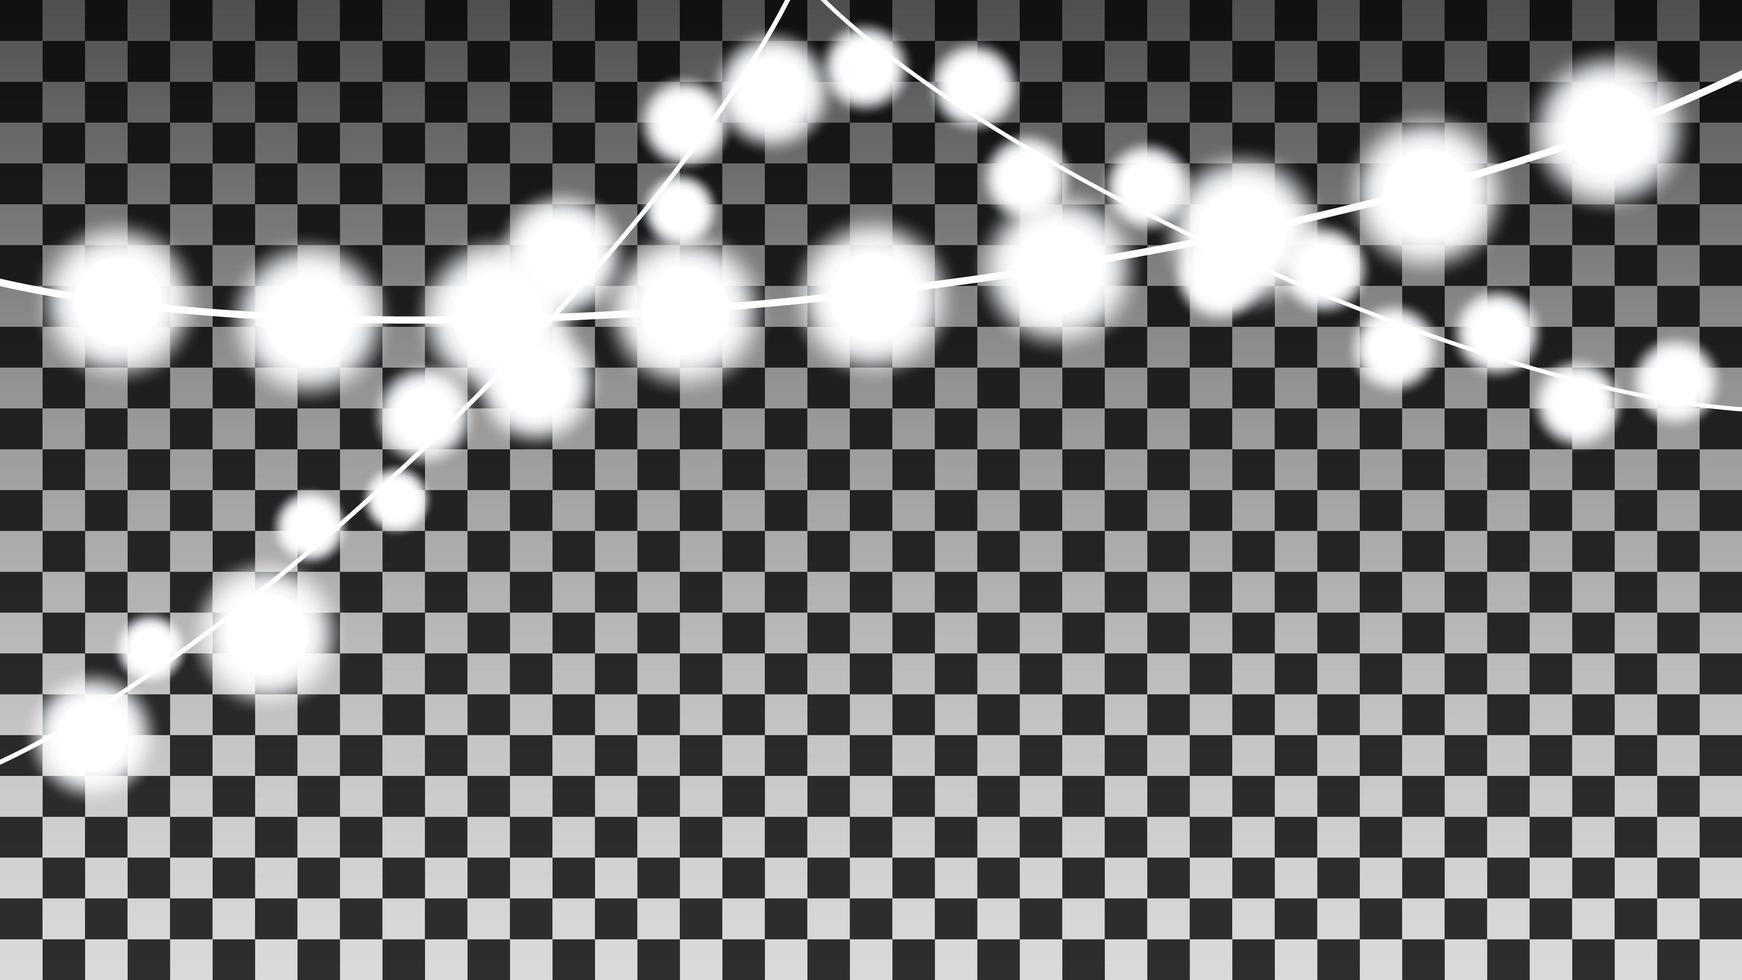 Christmas lights isolated on checkered background vector